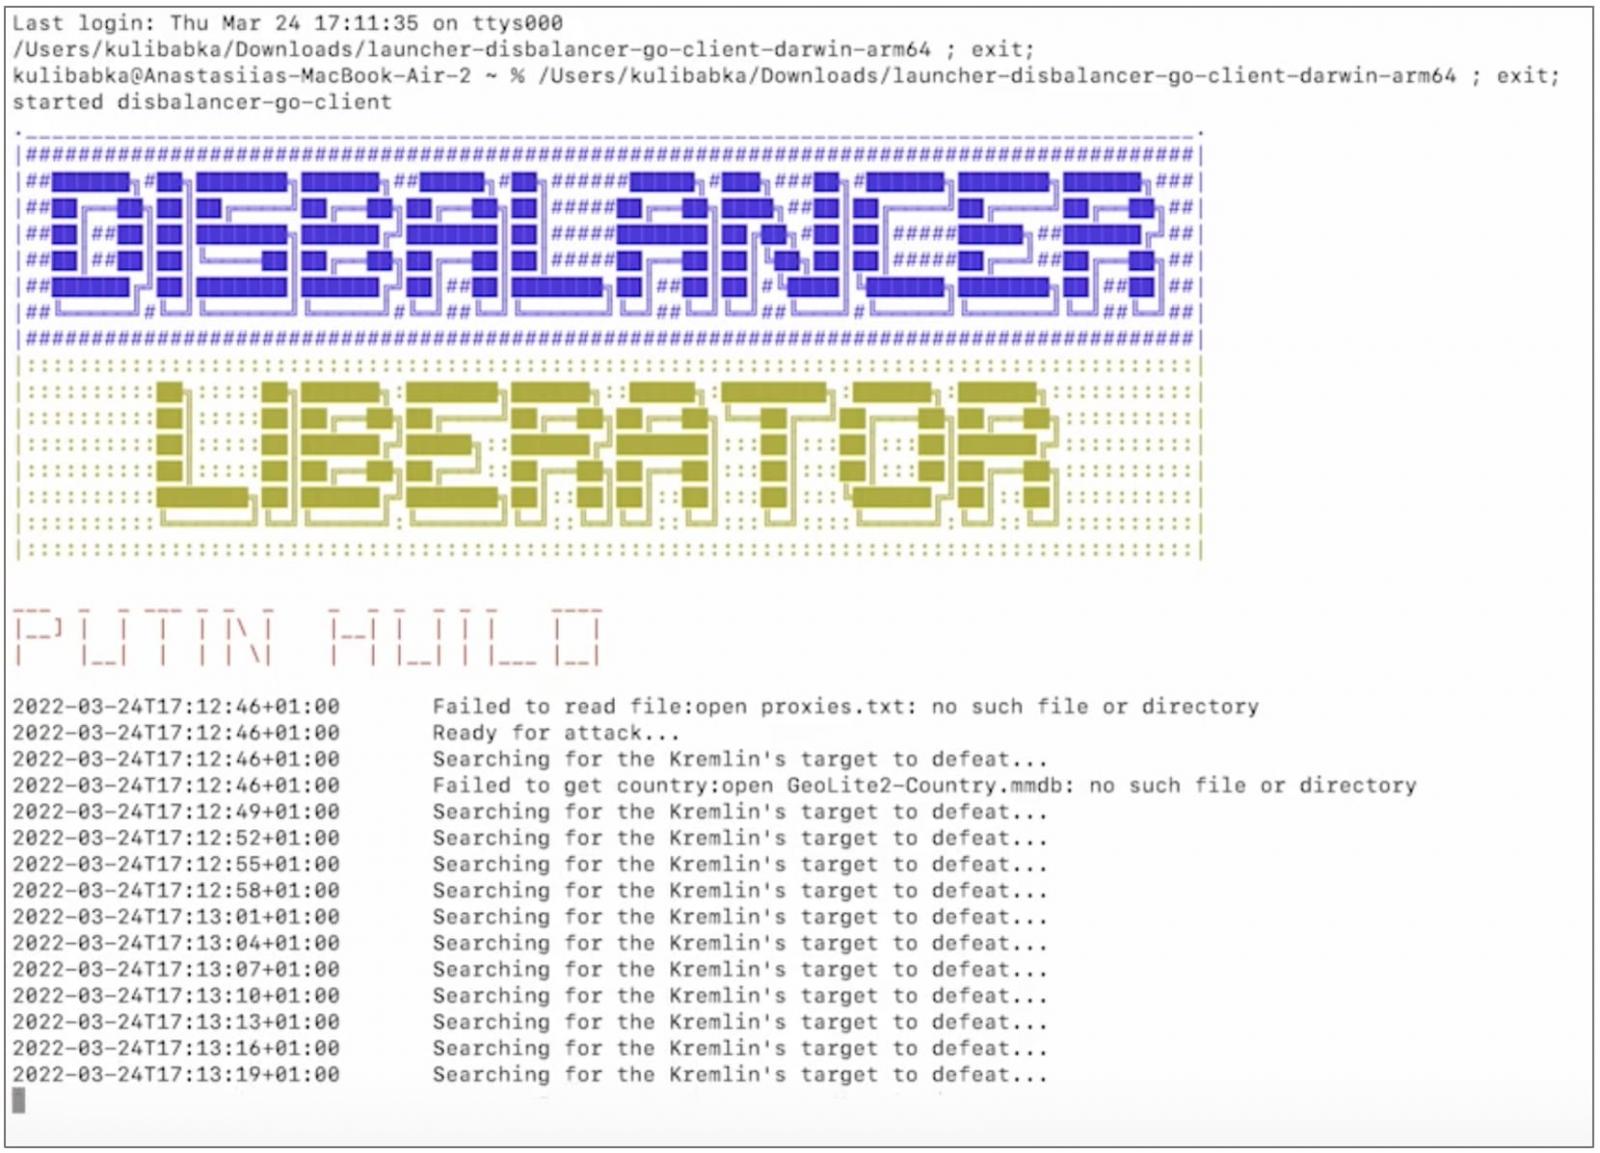 Liberator DDoS tool in action